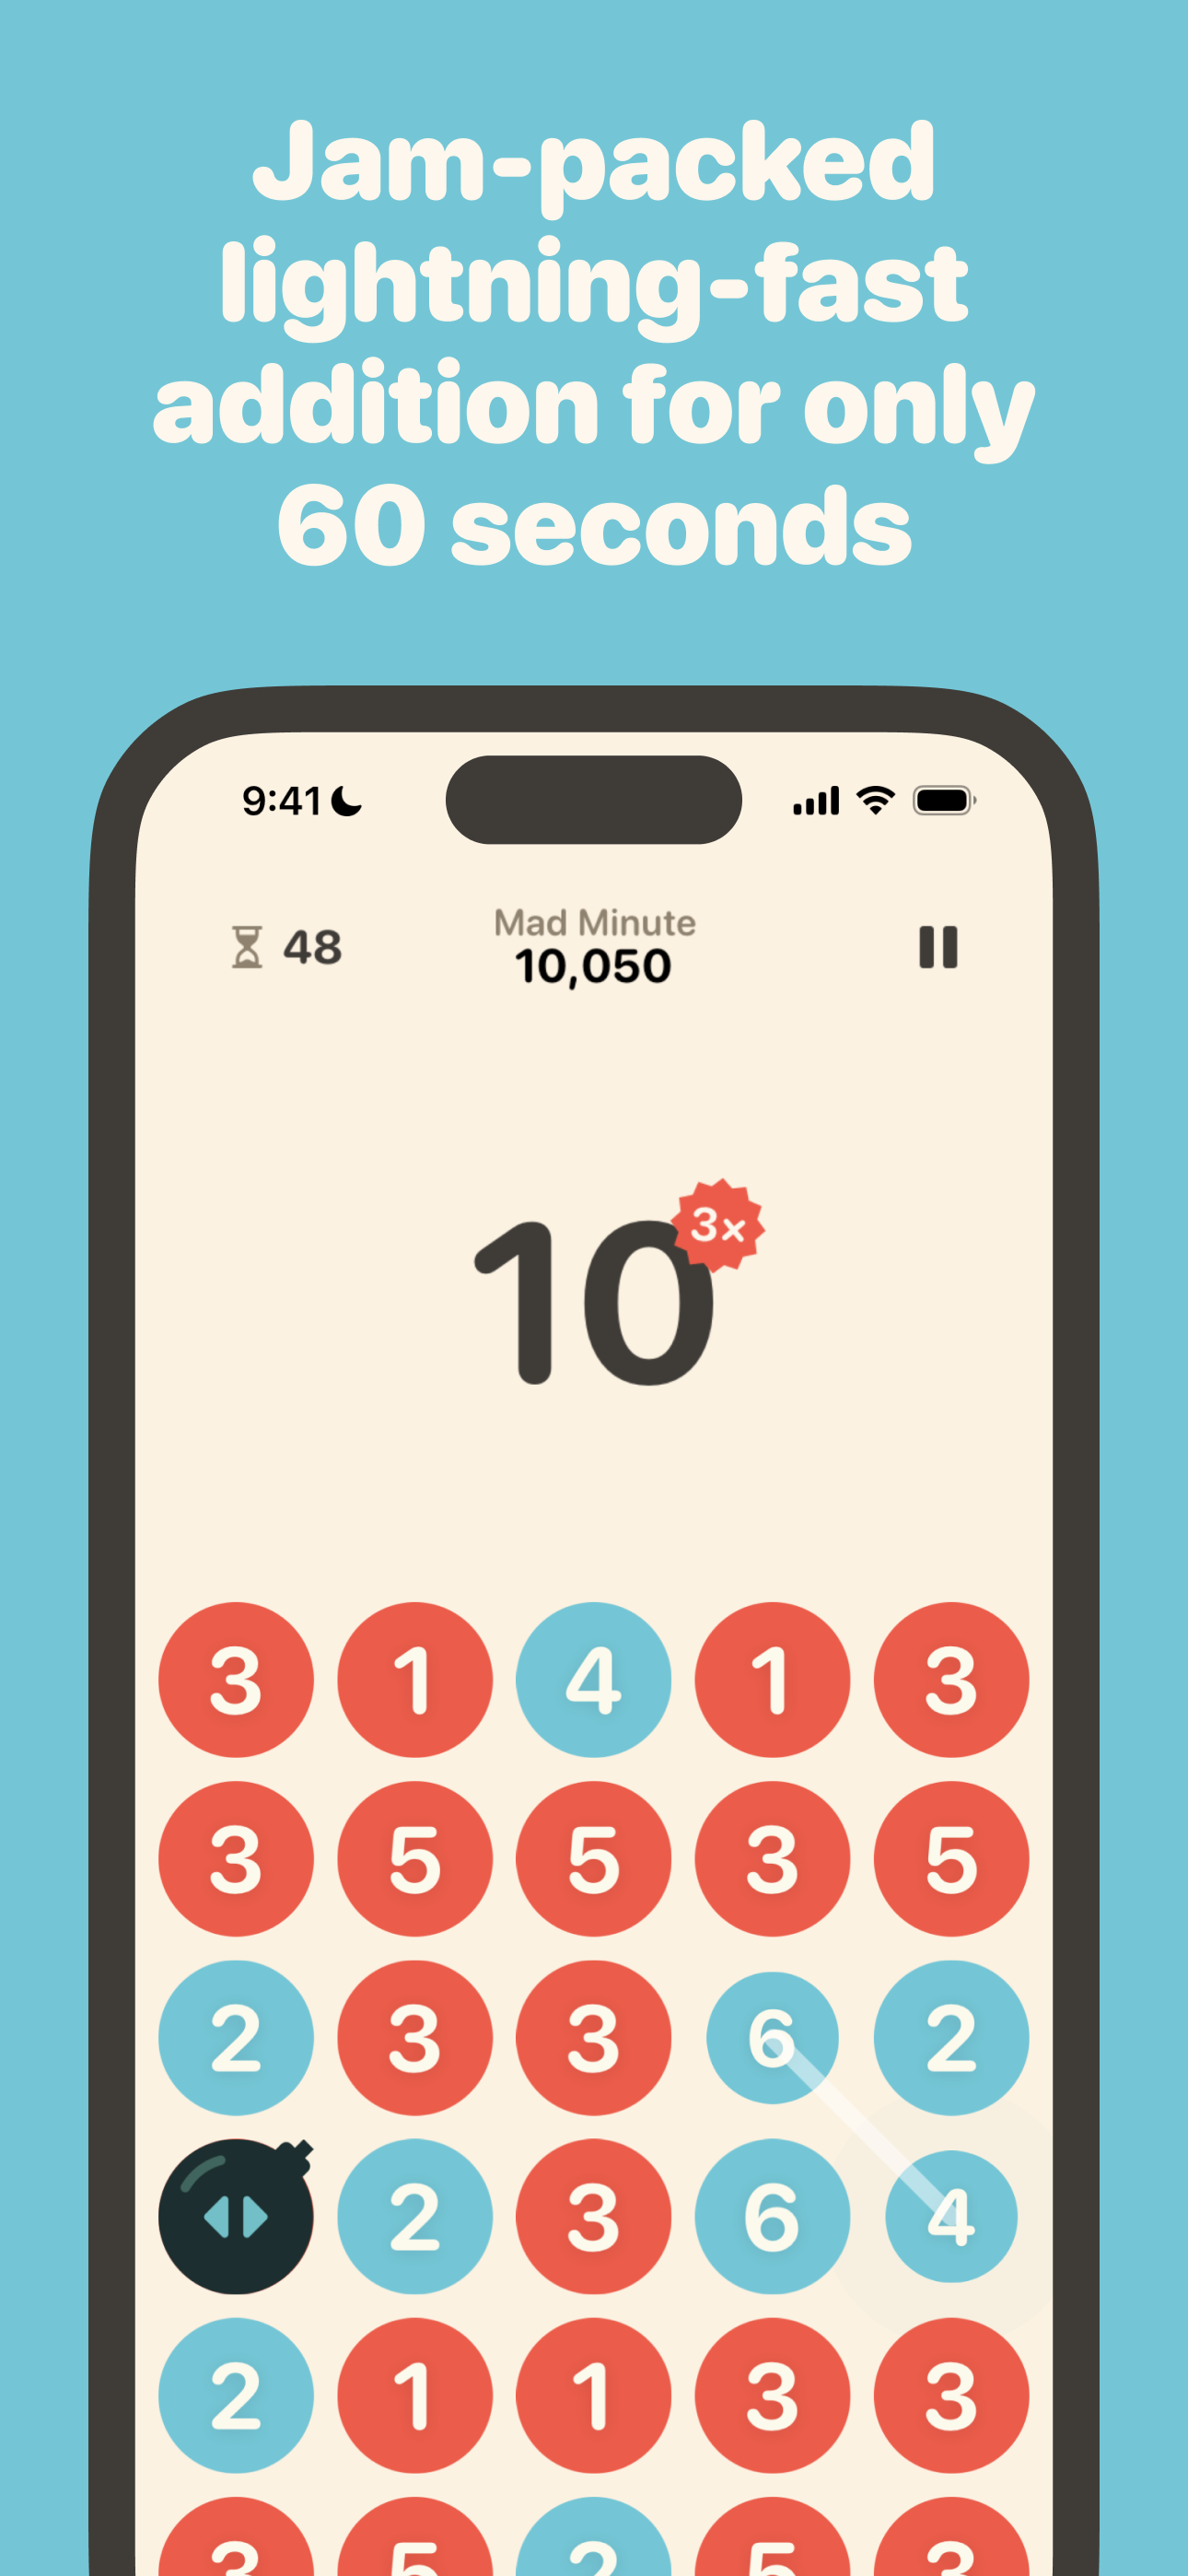 destructomath-3 - Lightning-fast number matching game for iOS